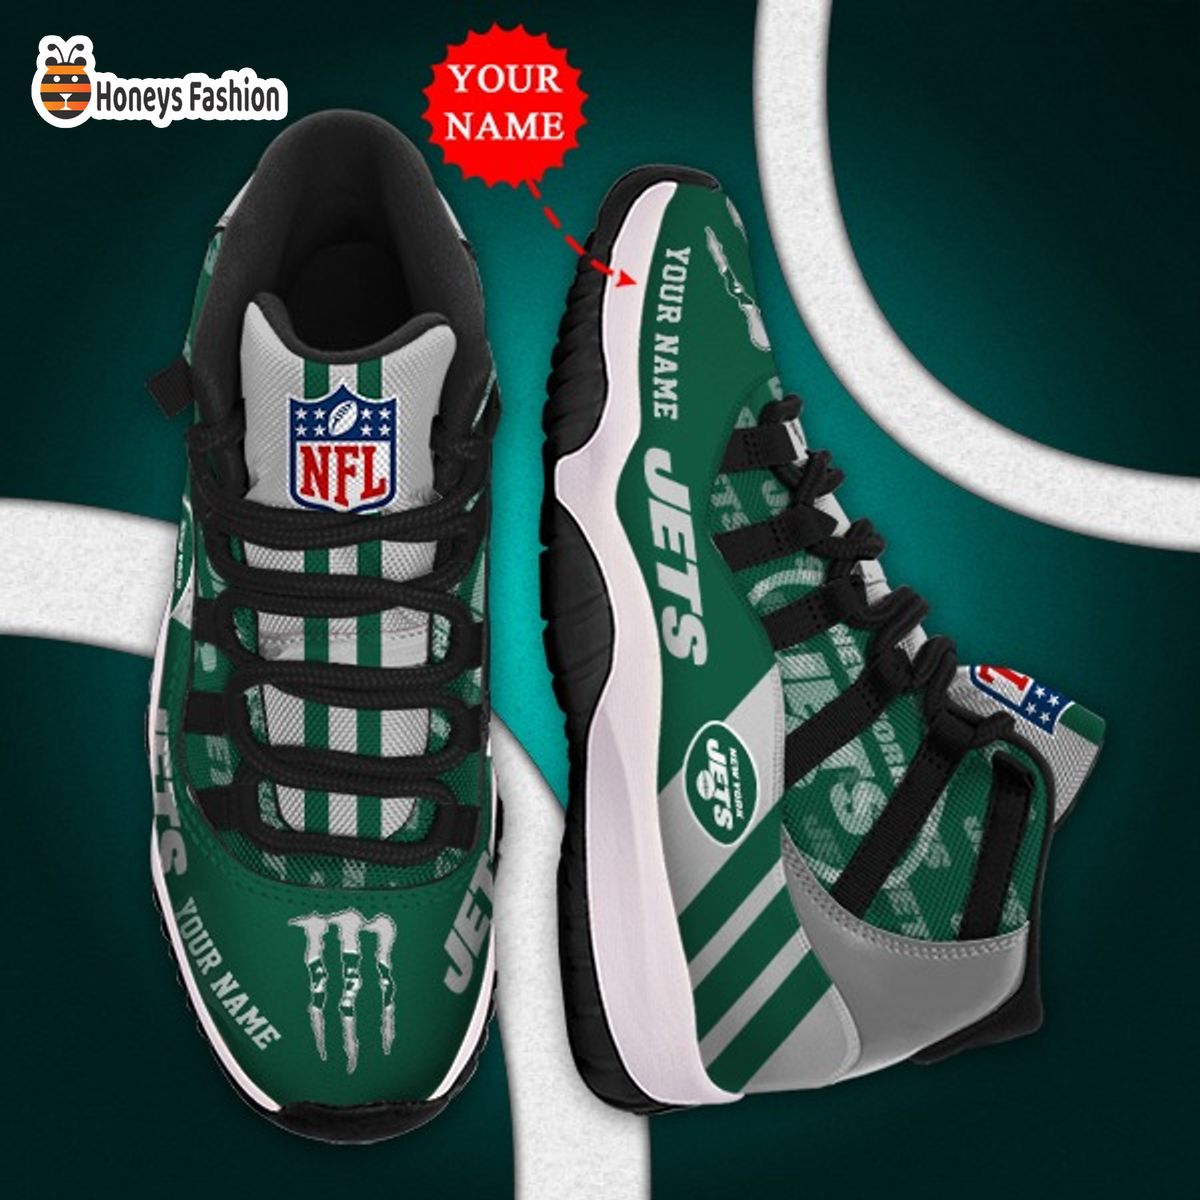 New York Jets NFL Adidas Personalized Air Jordan 11 Shoes